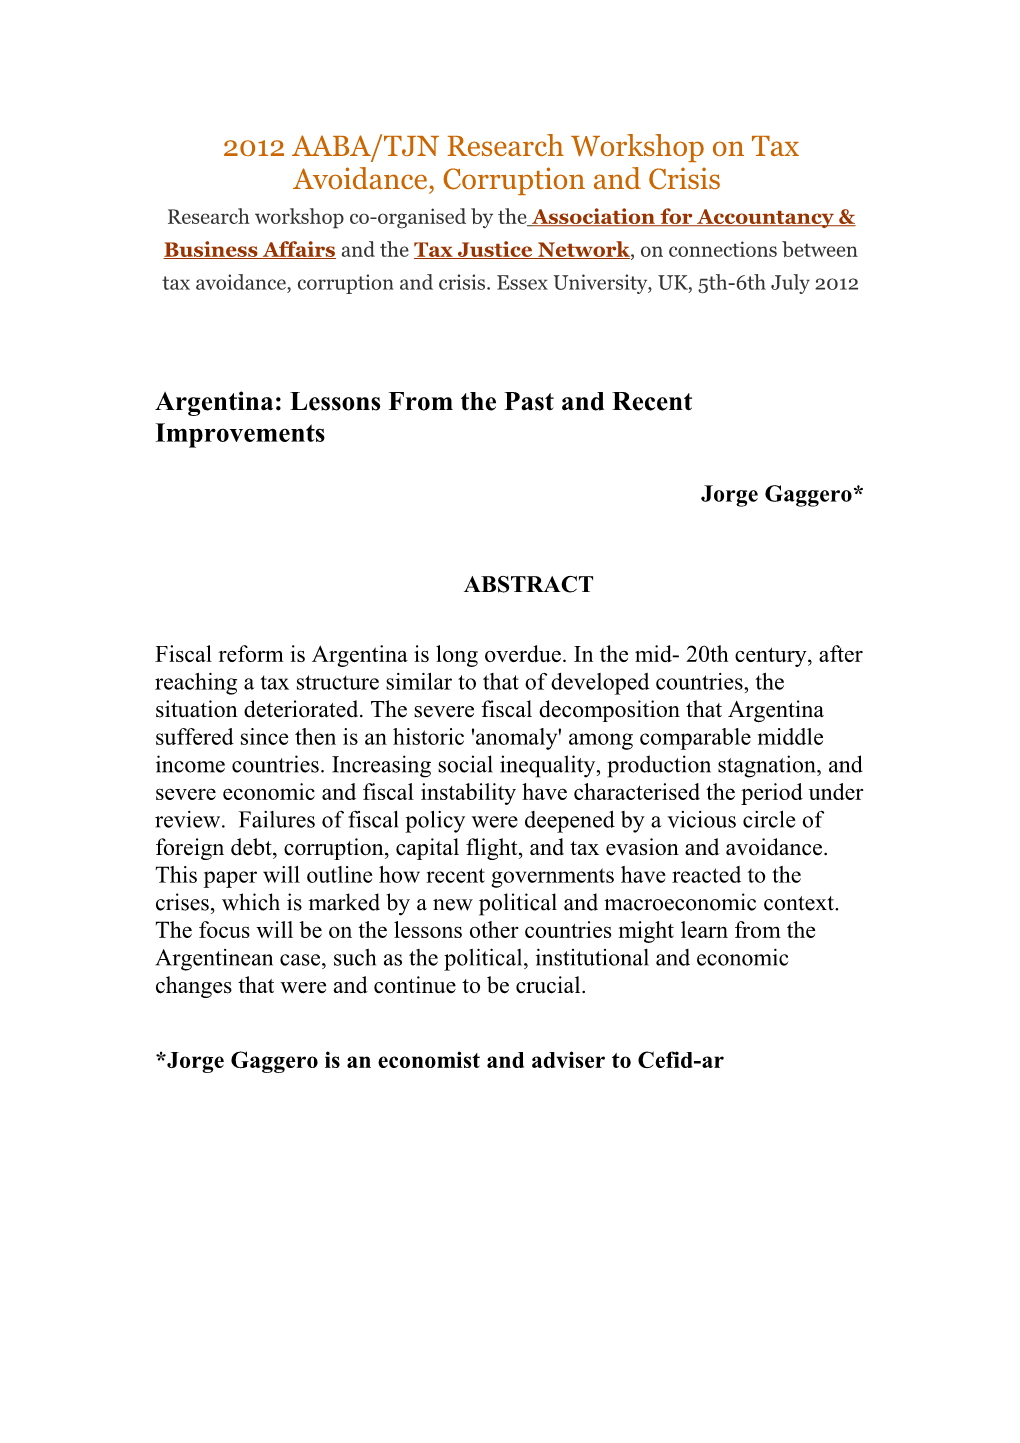 Argentina: Lessons from the Past and Recent Improvements